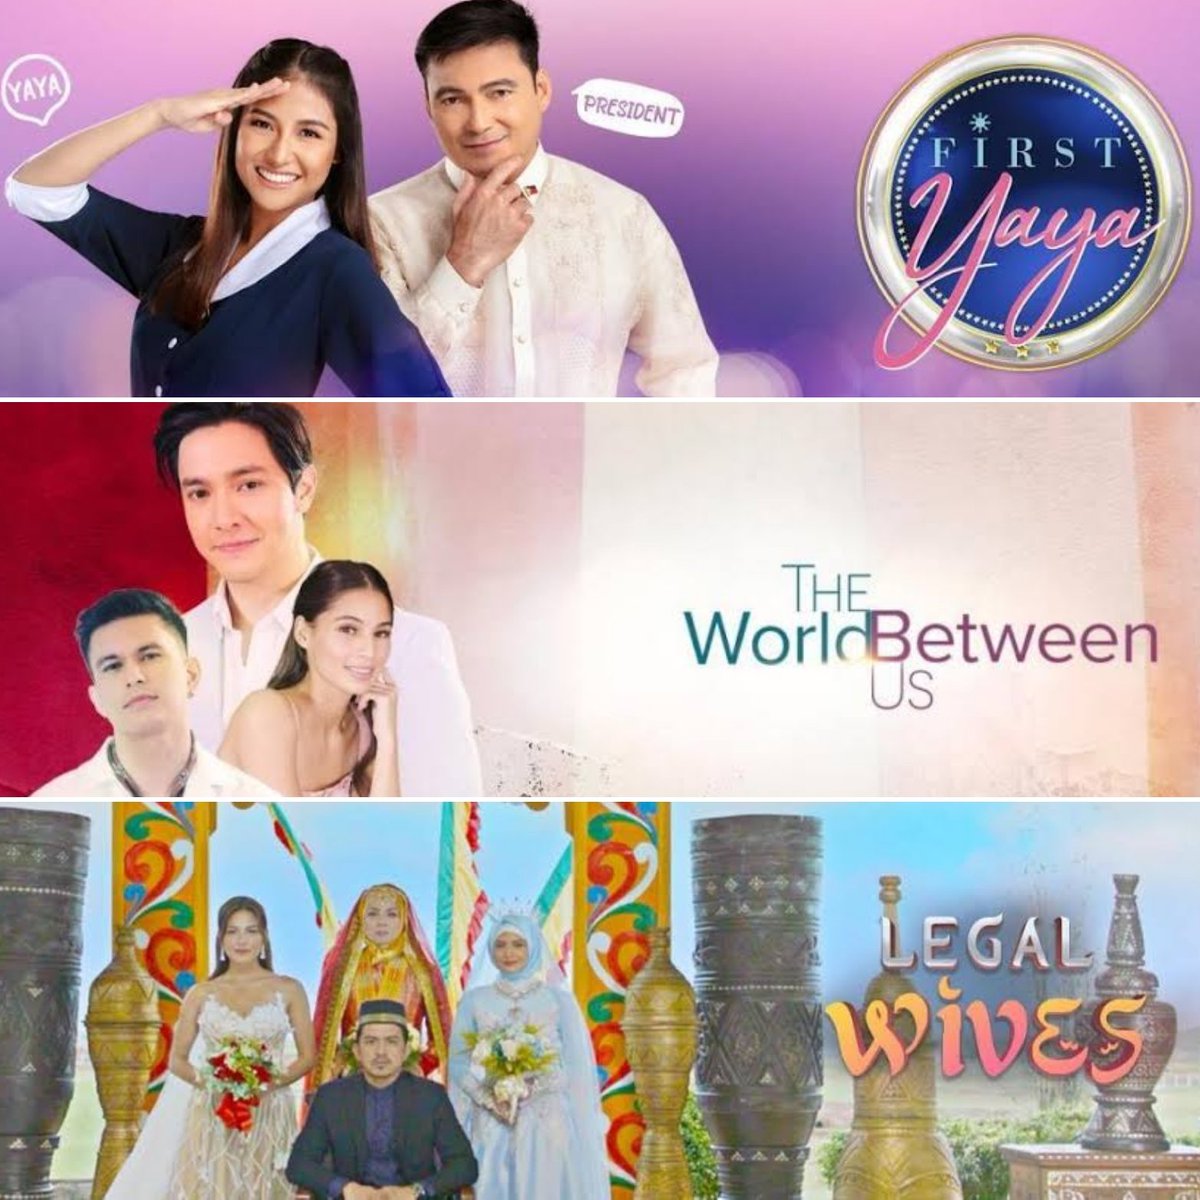 Legal wives tv3